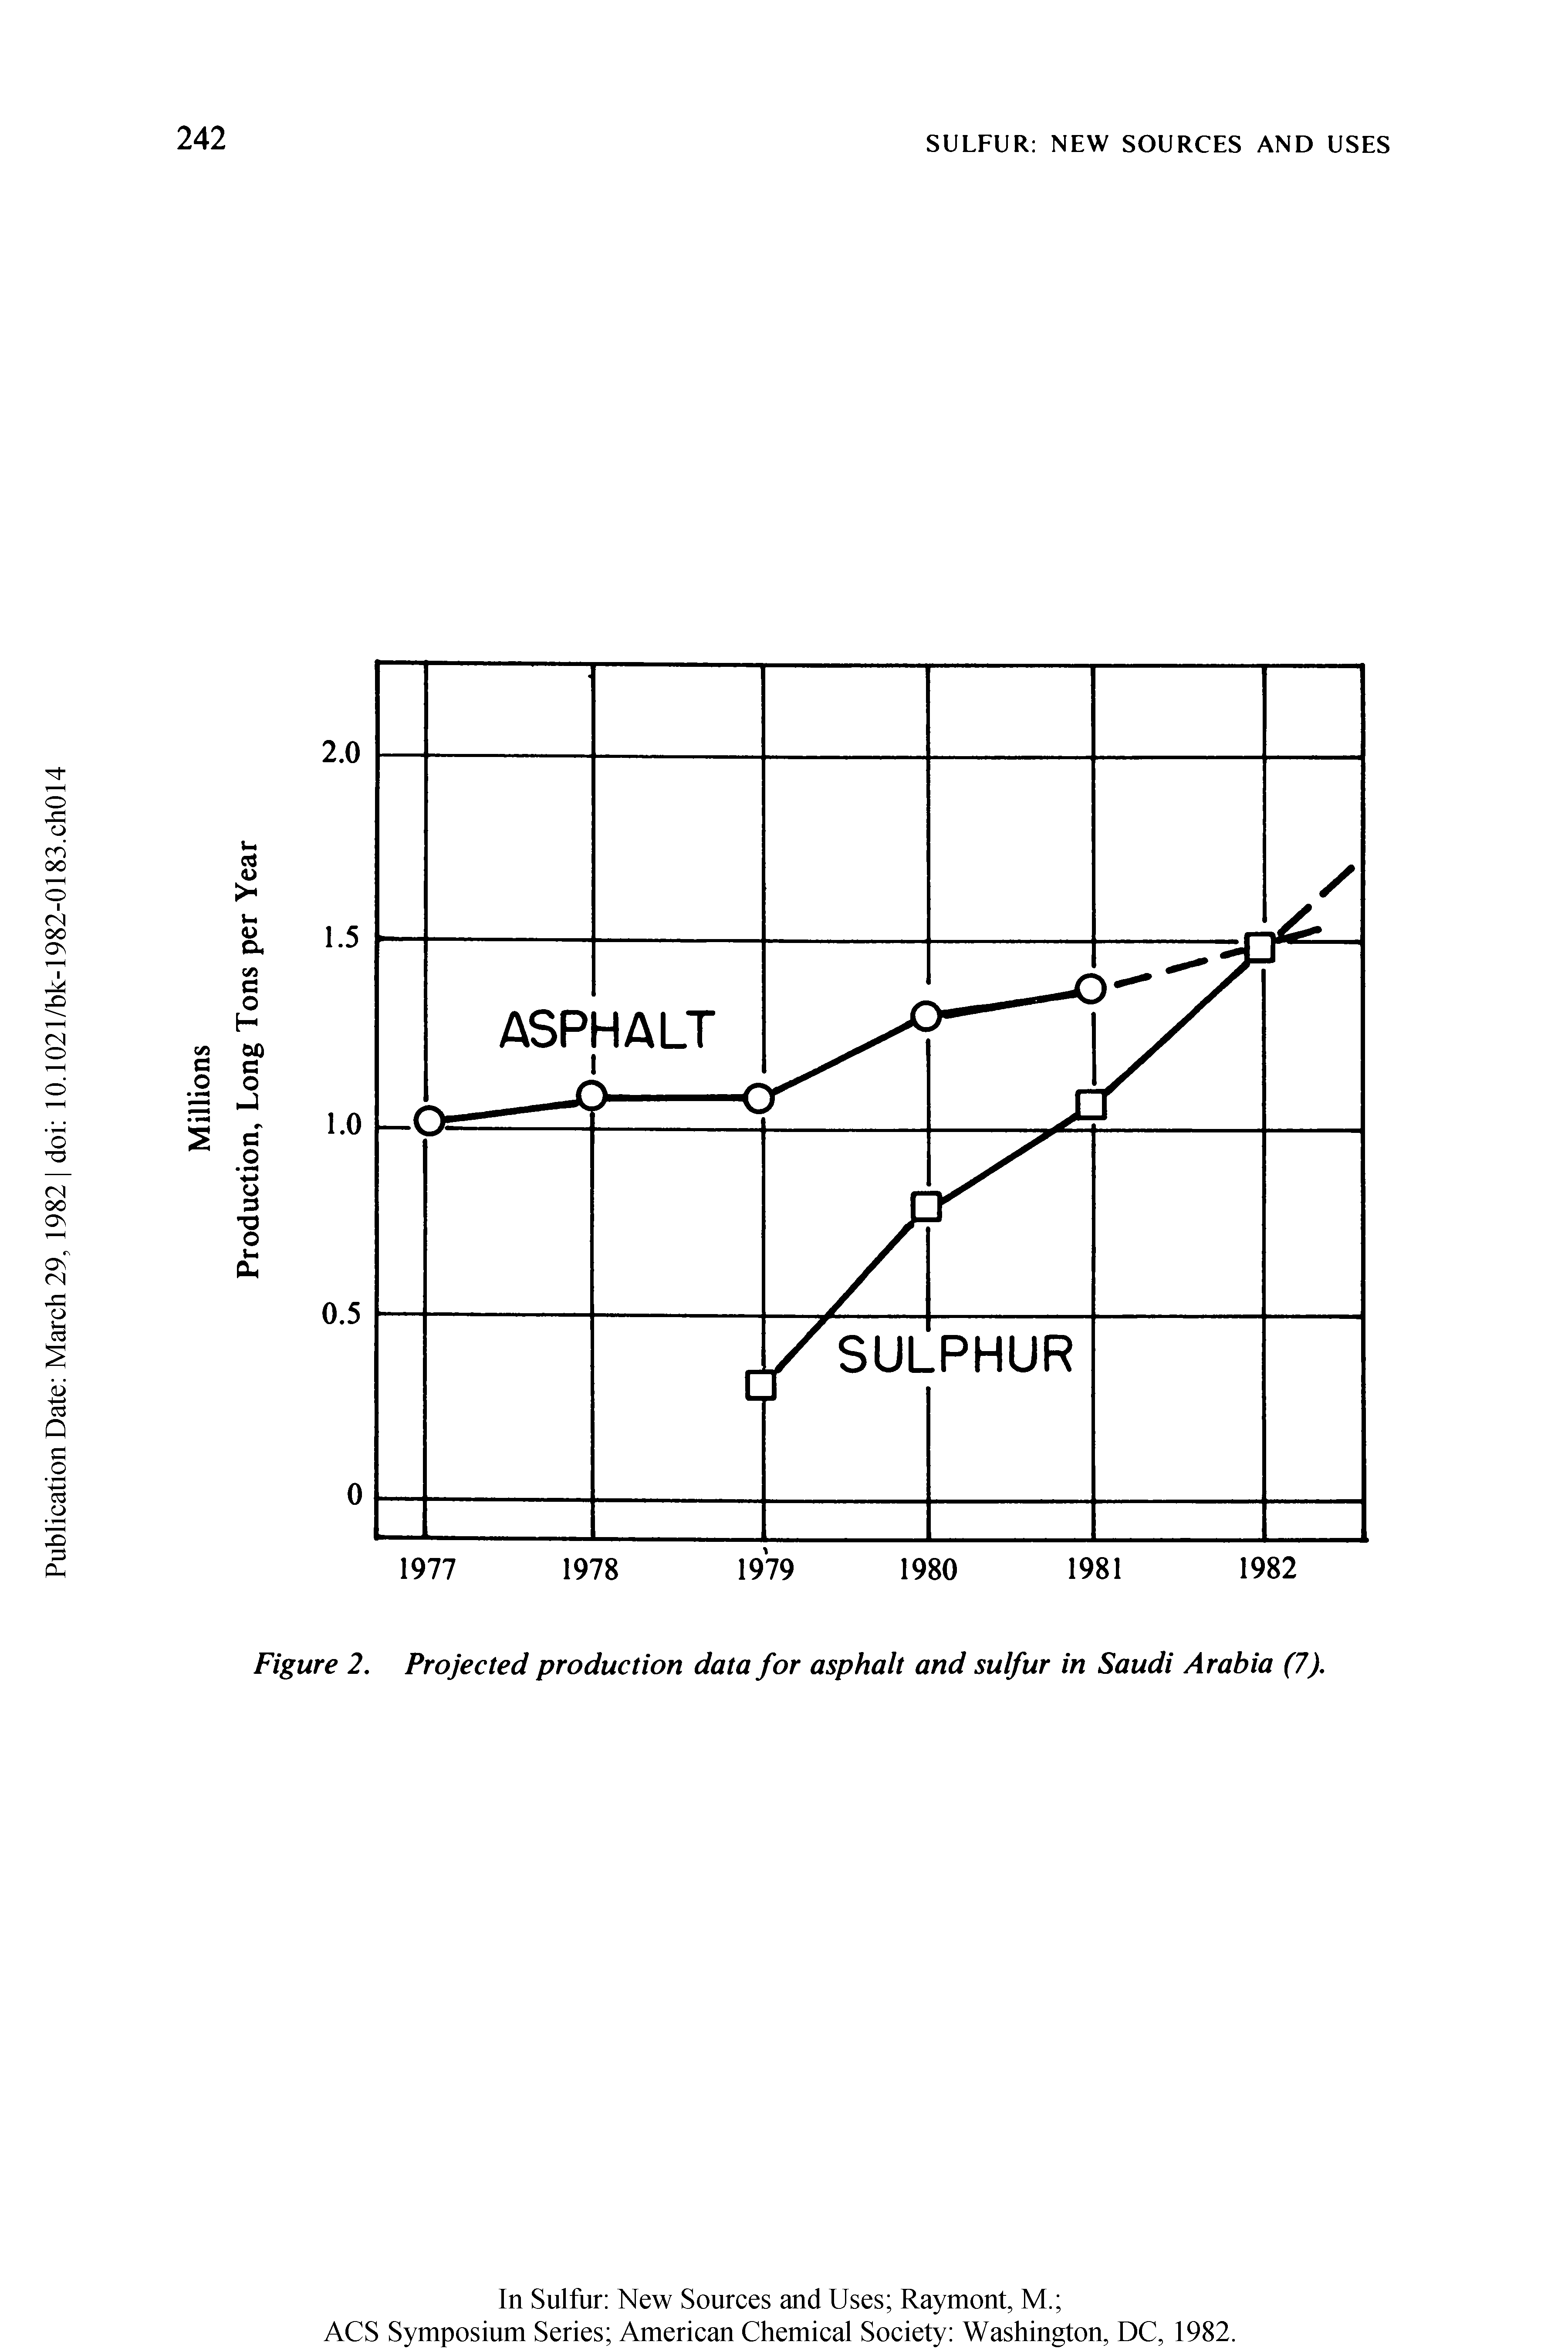 Figure 2. Projected production data for asphalt and sulfur in Saudi Arabia (7).